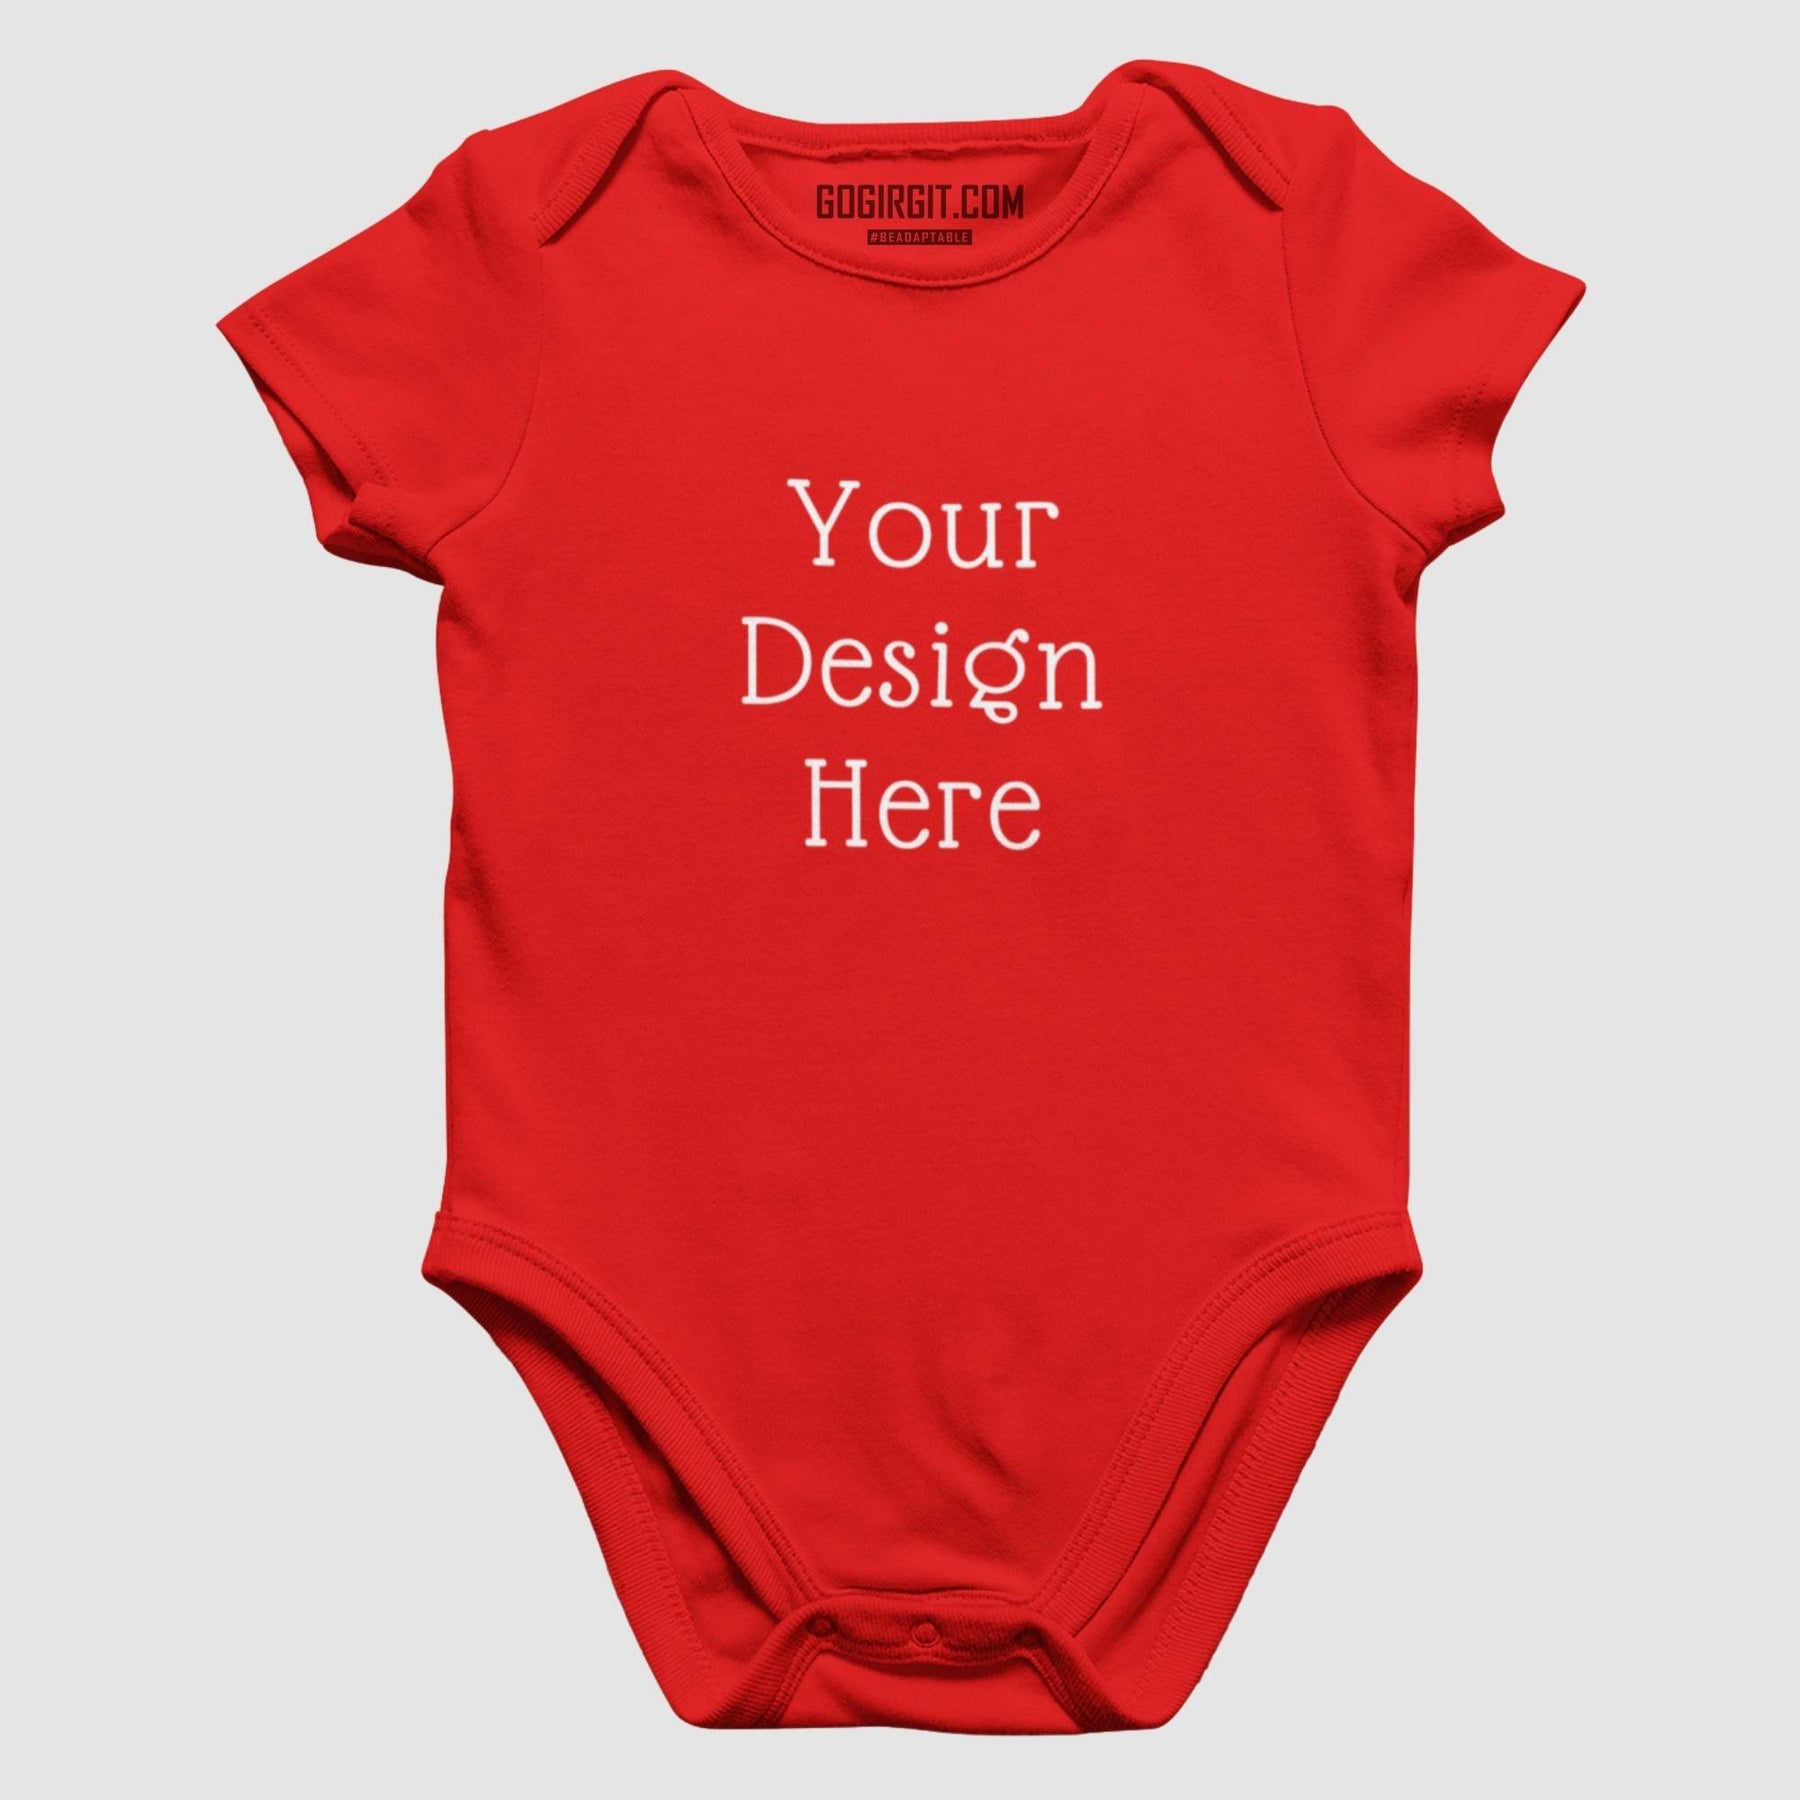 cotton-rompers-for-kids-also-called-onesie-personalised-and-customized-color-red-gogirgit